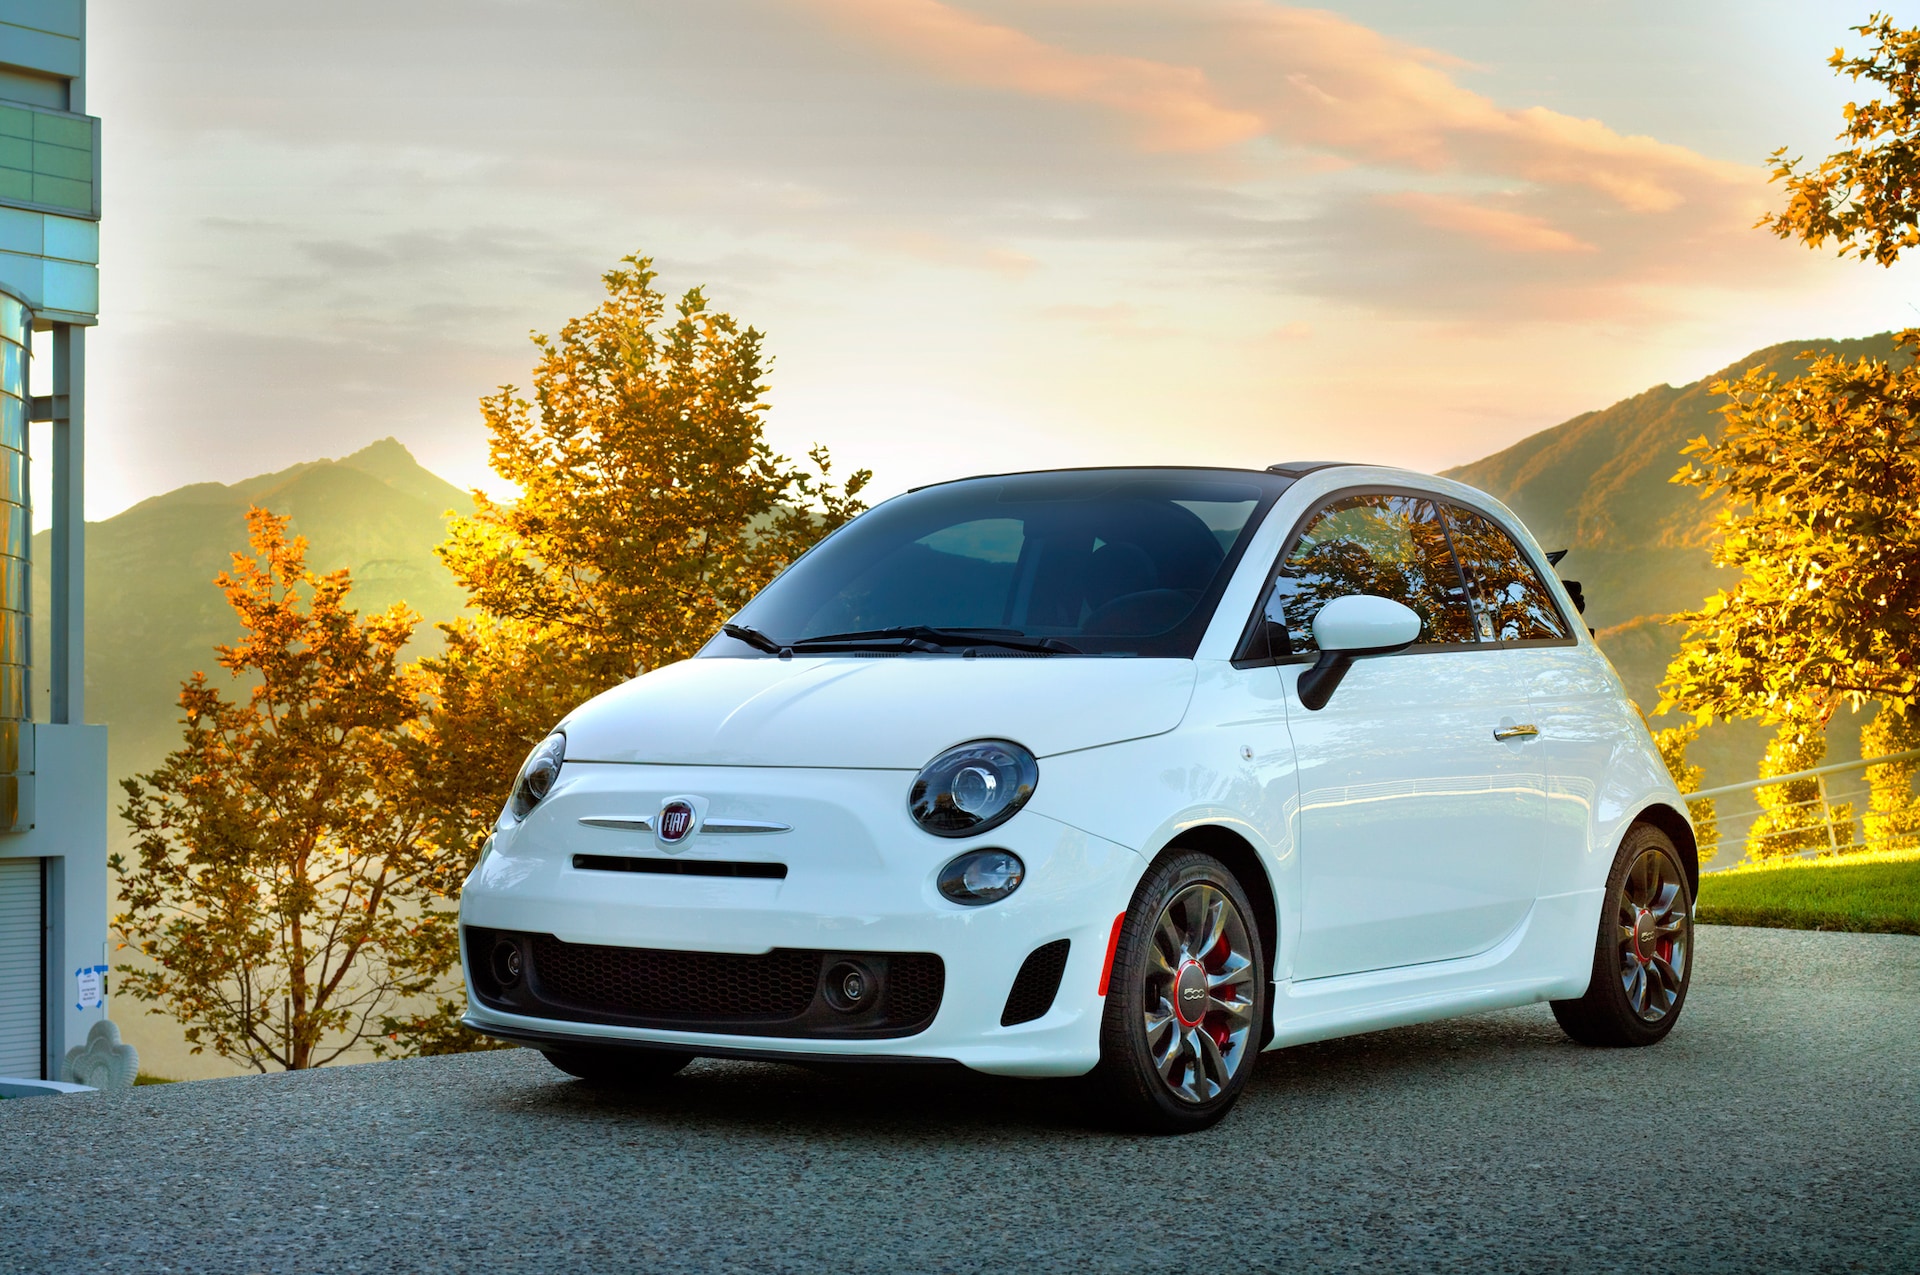 New 2014 Fiat 500c GQ Edition is for the Modern Man